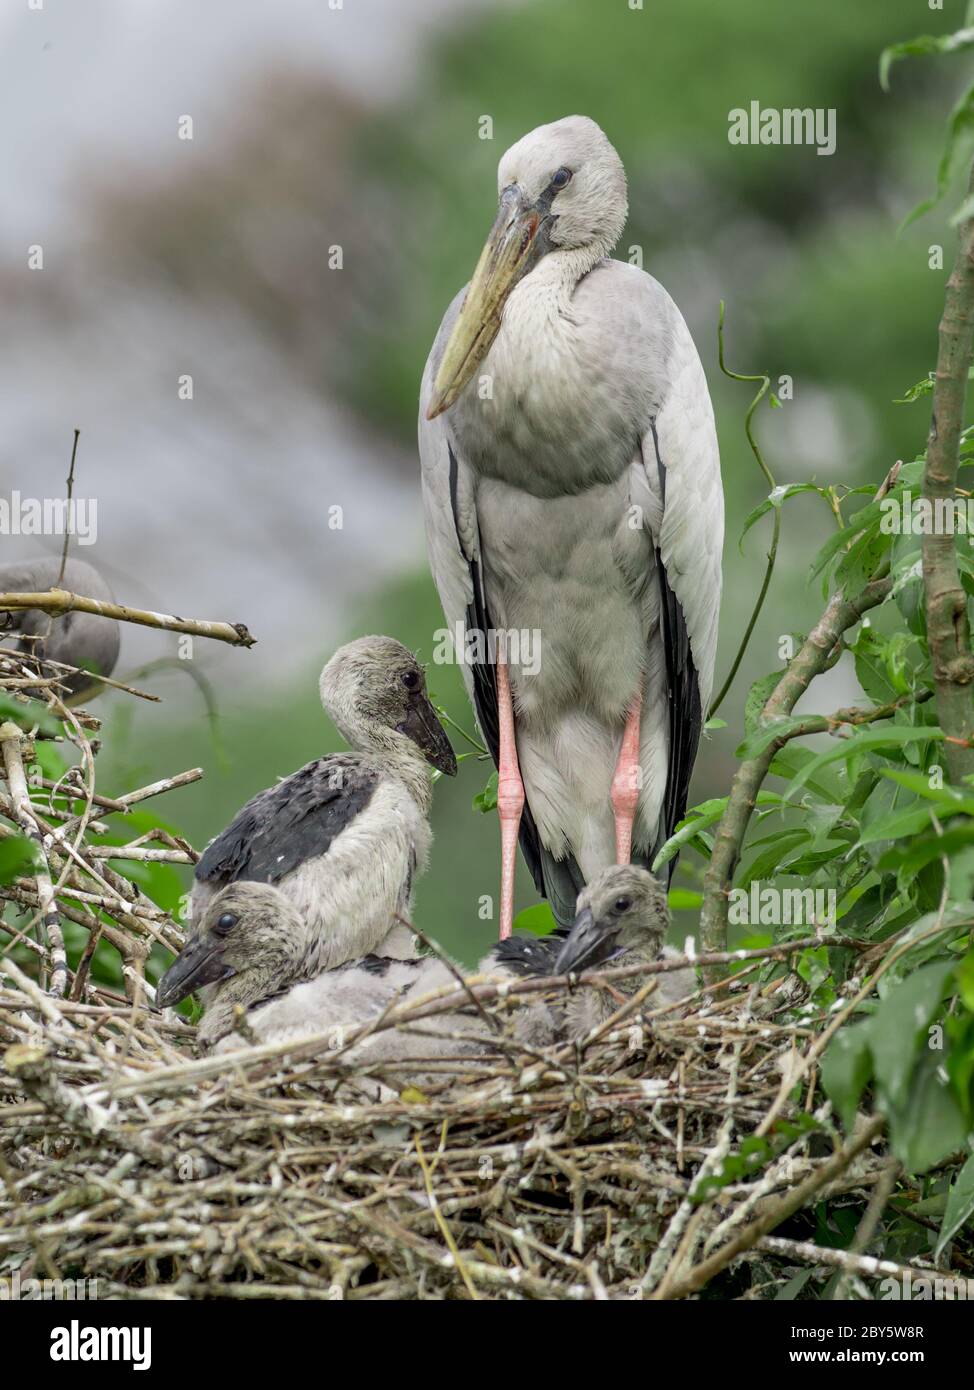 Asian open bill stork in its nest with Chick Stock Photo